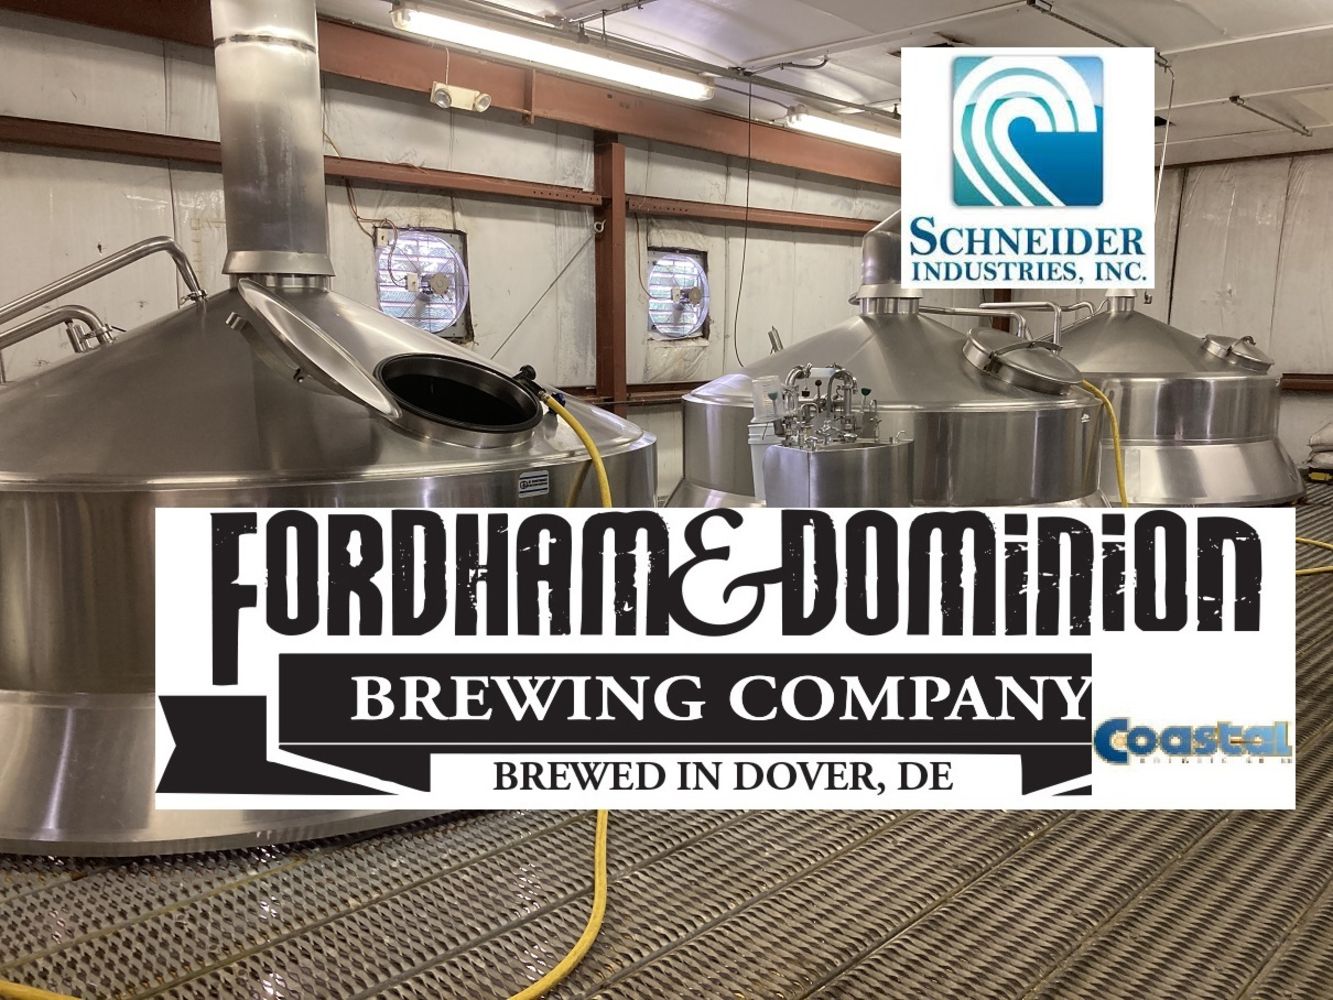 Coastal Brewing Co. - Complete Micro-Brewery - 50 bbl brewhse, 20+ tanks, Slim-Can, Keg, Bot. Lines! - ALL AMERICAN-MADE STAINLESS EQUIP! -